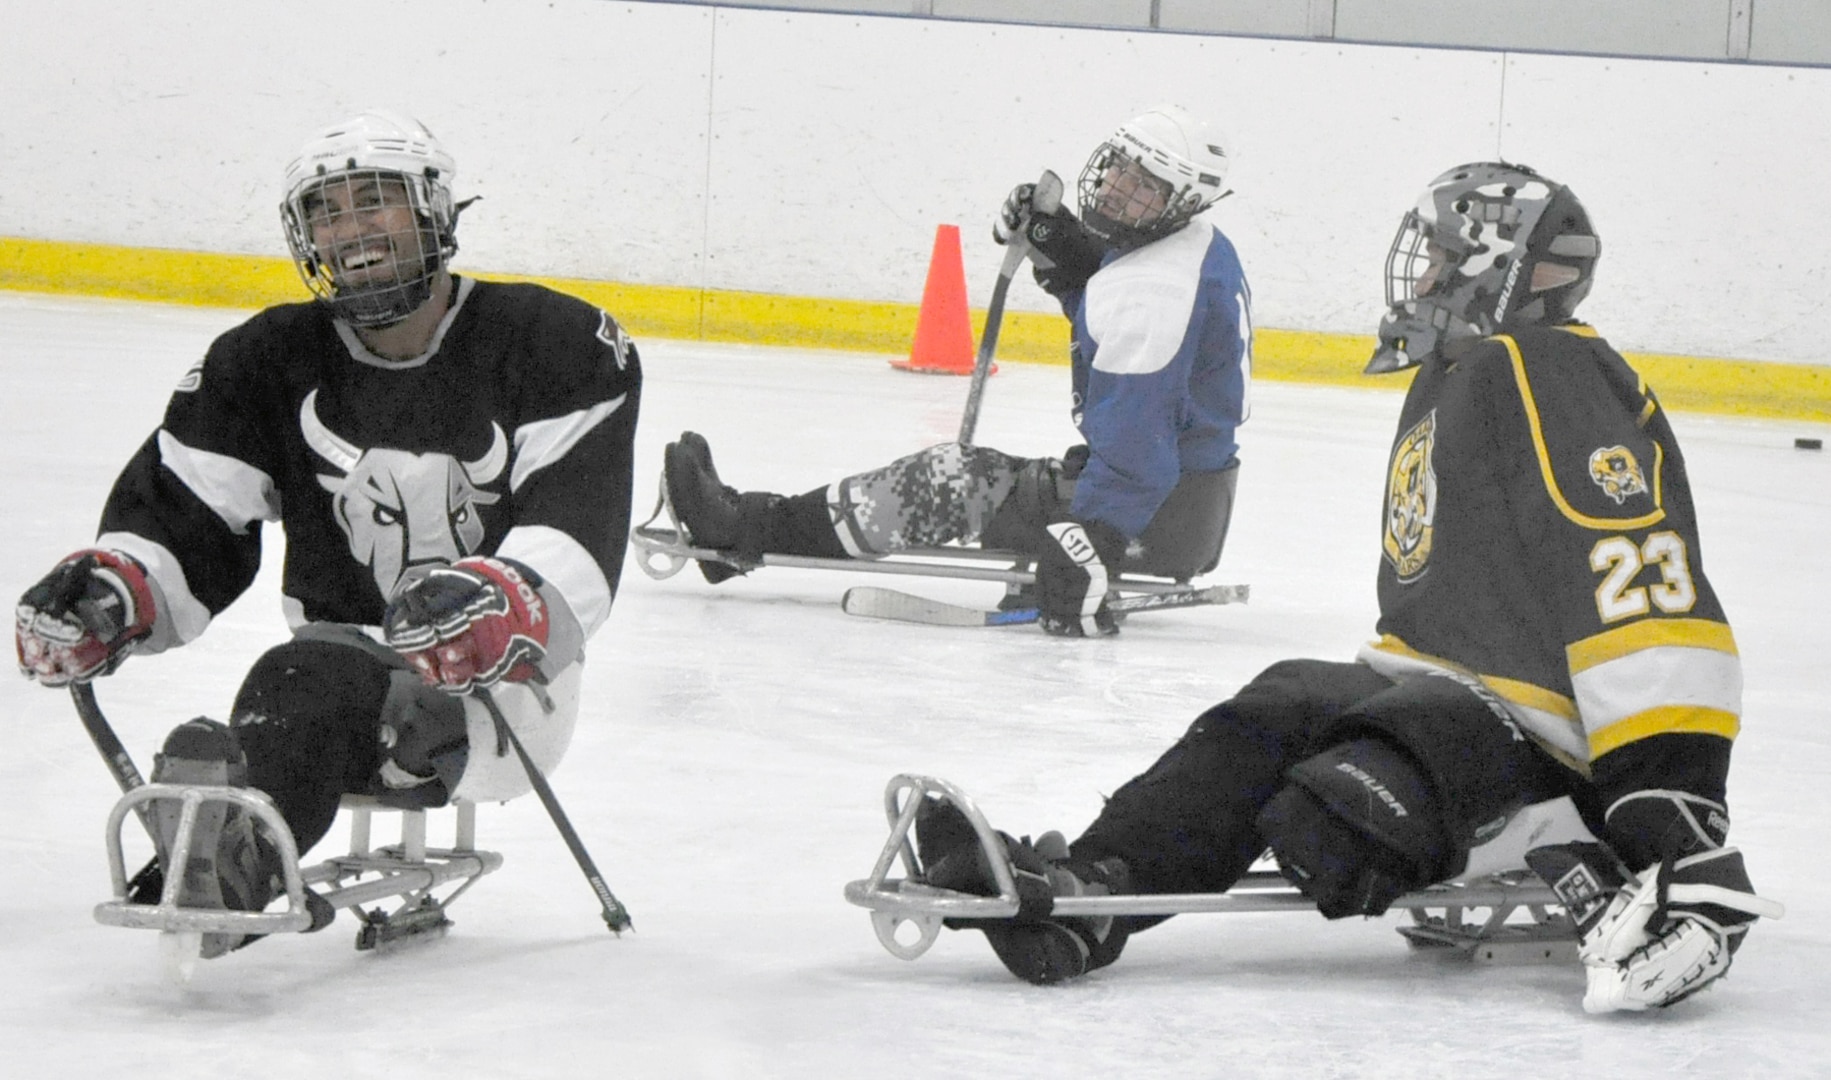 San Antonio Rampage sled hockey defenseman Rico Roman (left) is all smiles as he scores a goal on the Rampage’s goaltender, Jen Yung Lee (right), during a practice session July 31. Roman, Lee and Joseph Sweeney (not shown), have been selected to represent Team USA at the 2014 Paralympic Winter Games in Sochi, Russia from March 7-16, 2014. (Photo by Robert Shields, Brooke Army Medical Center Public Affairs)